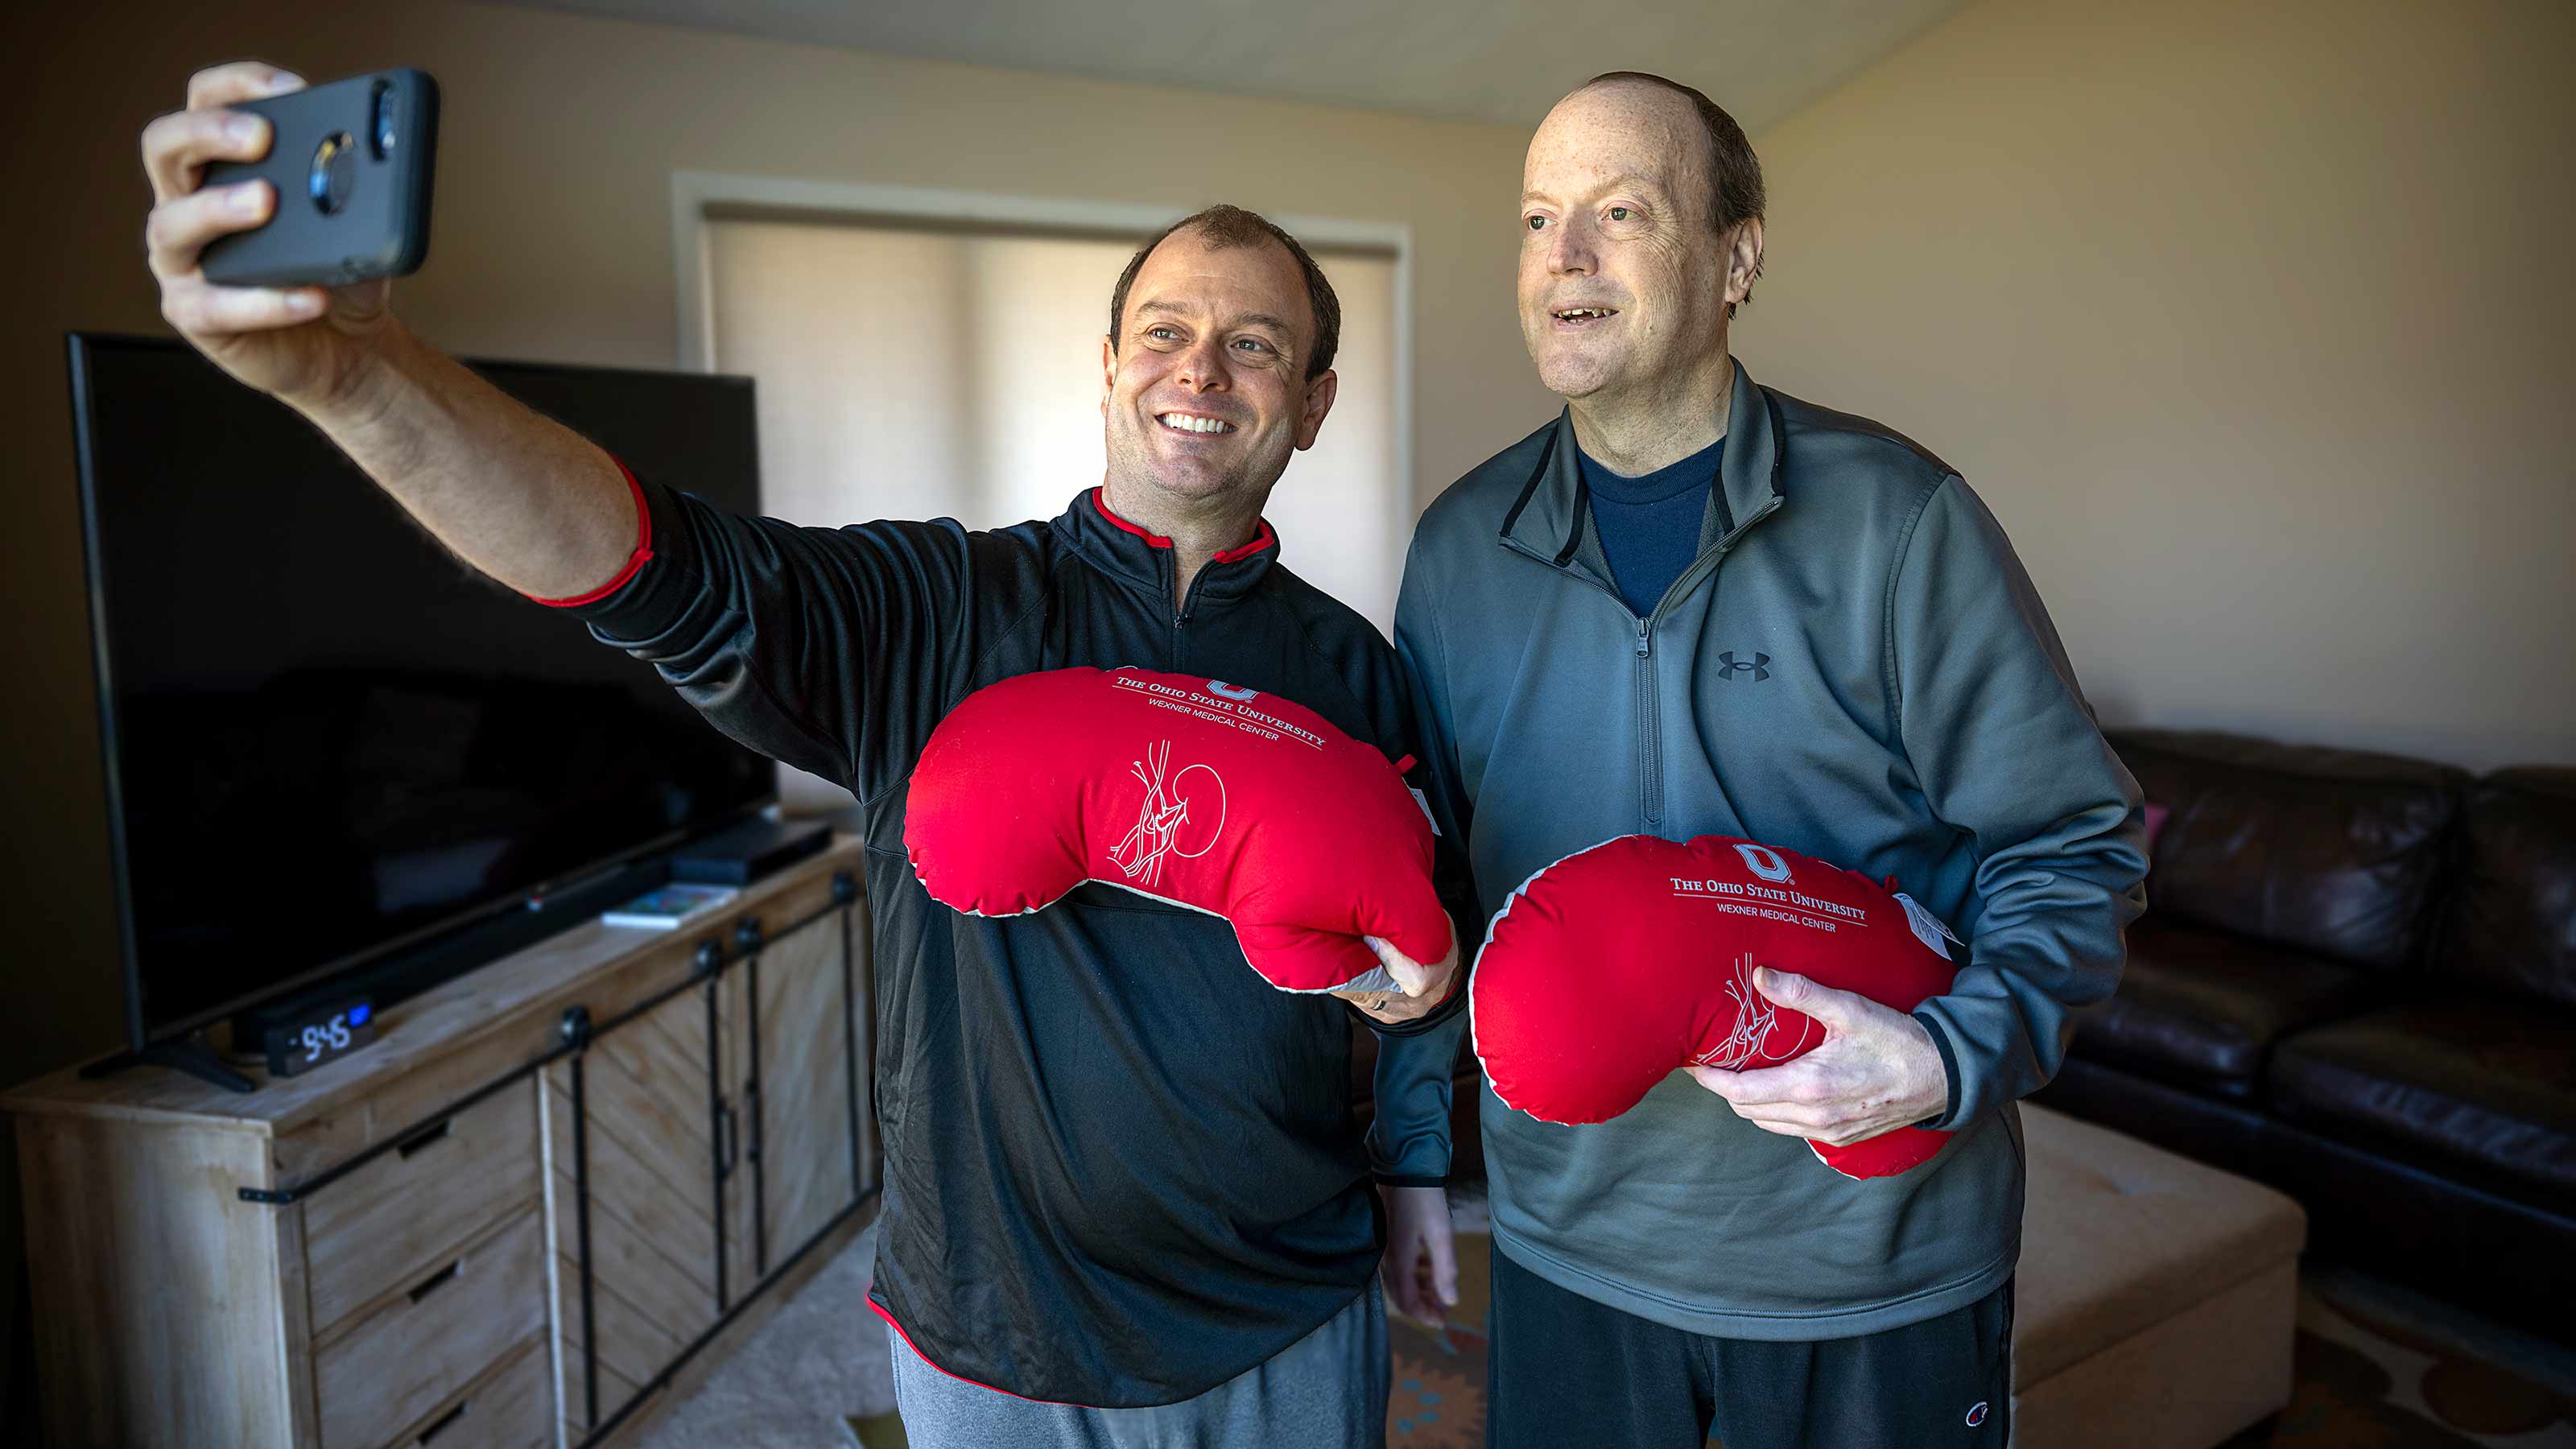 ‘Let’s do this.’ Lifesaving kidney transplant strengthens bond between brothers